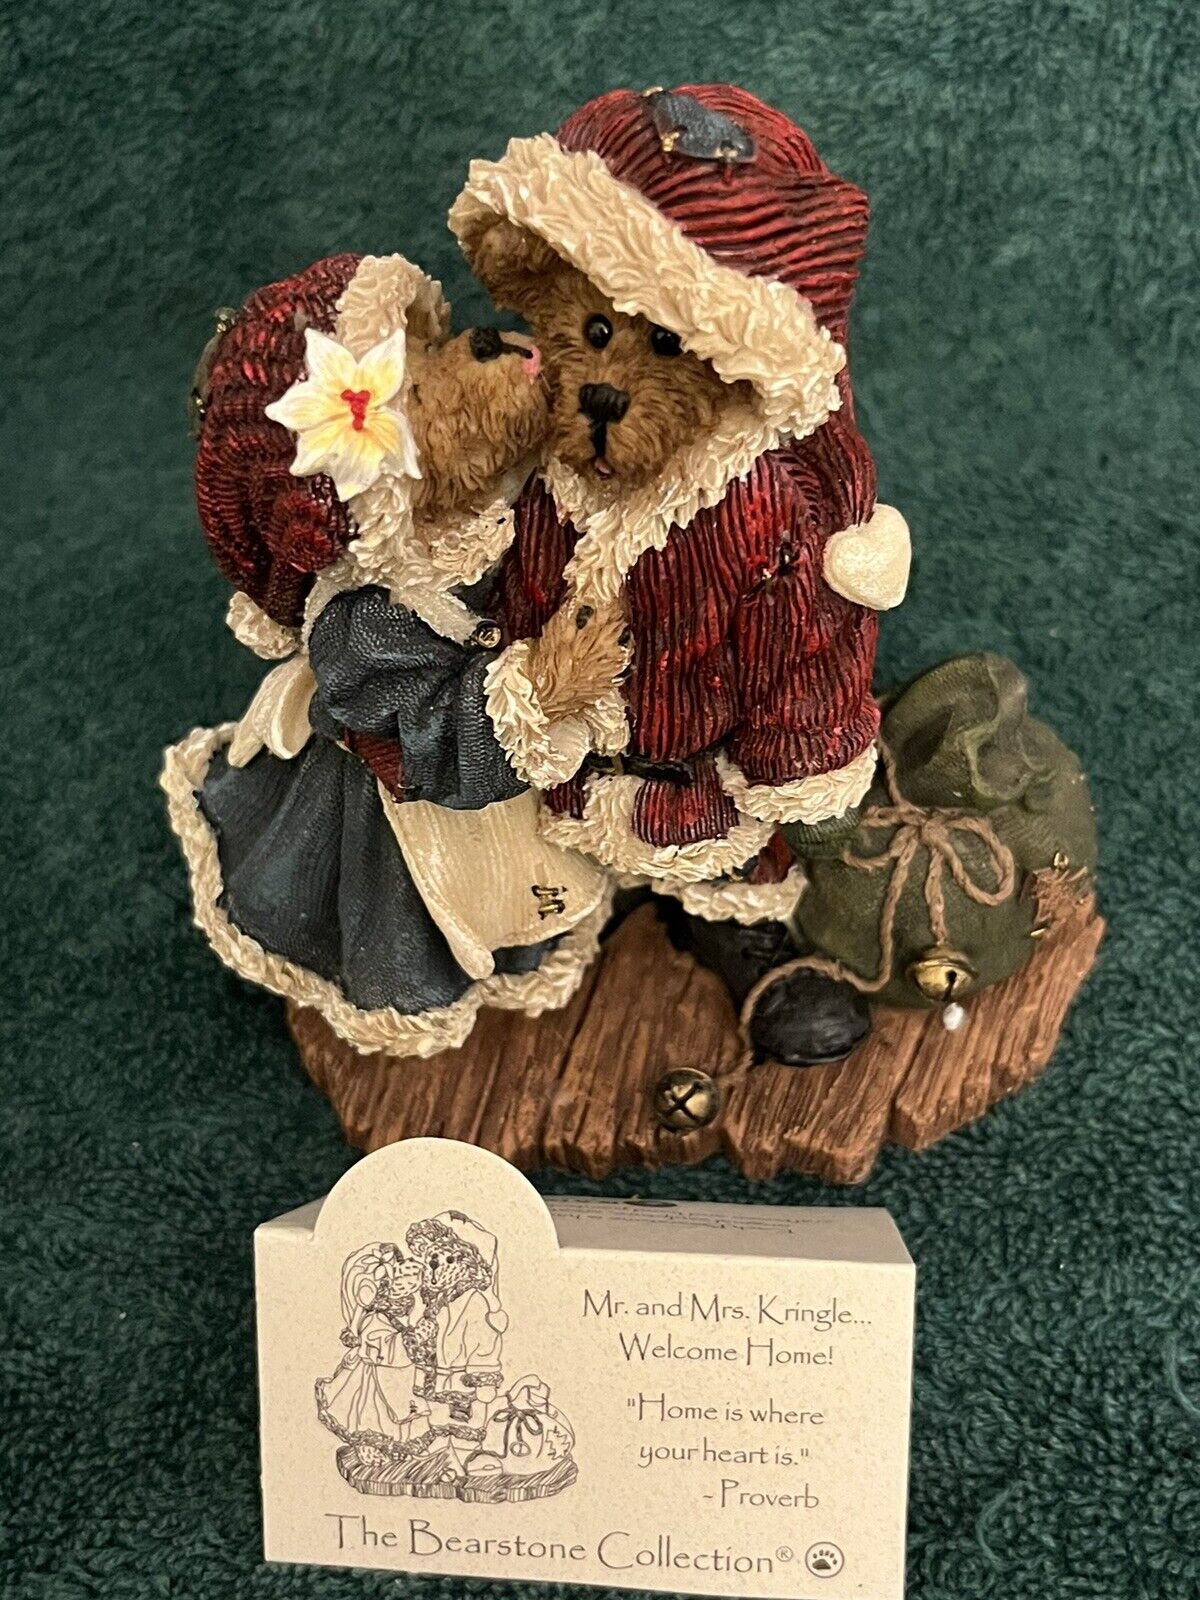 boyds bears bearstone collection …Mr & Mrs Kringle…WELCOME HOME # 4014750